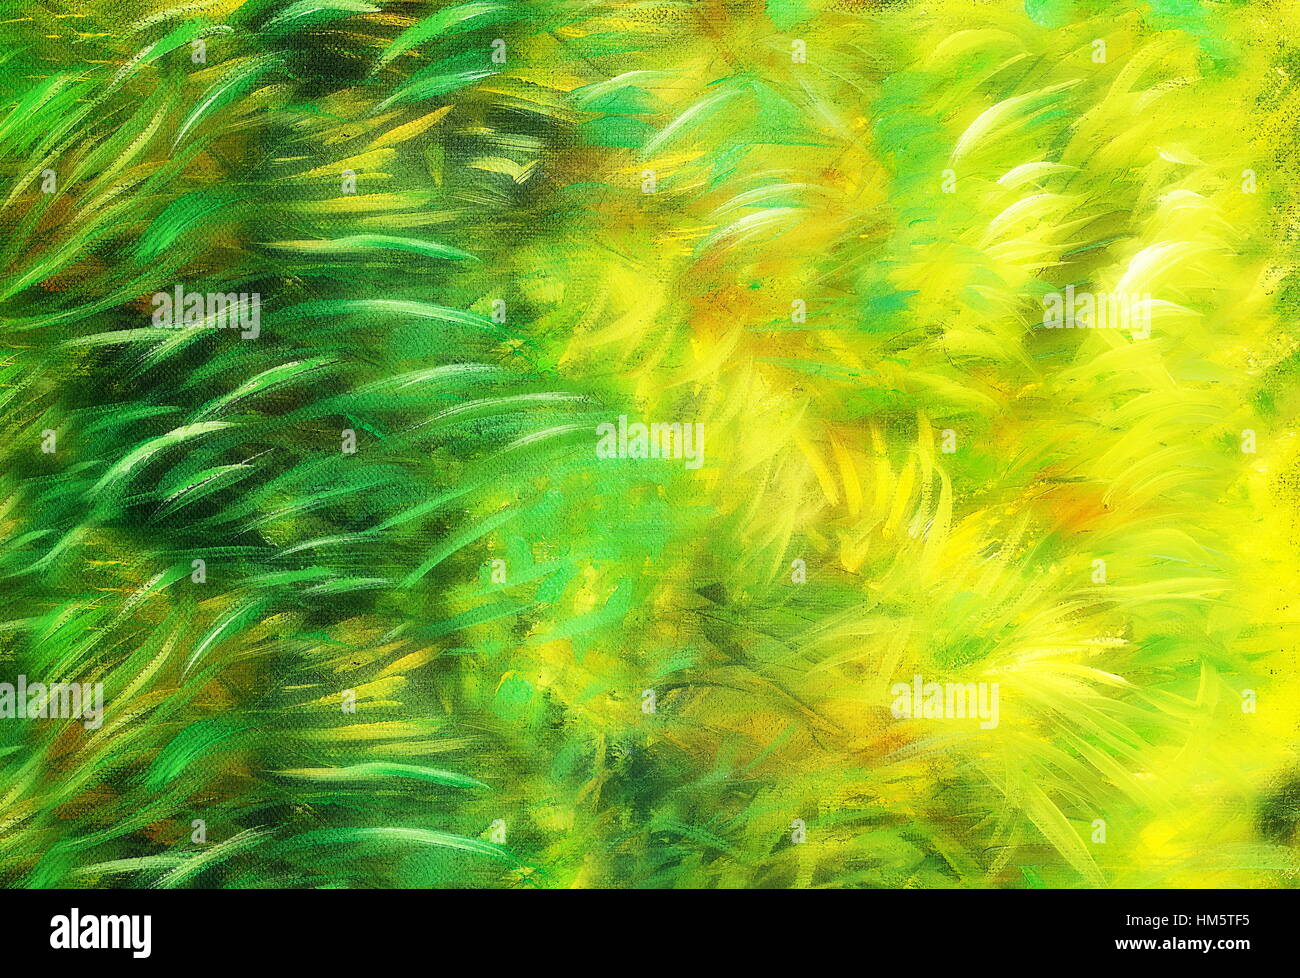 wild meadow grass structure in bright green tones, painting deta Stock Photo